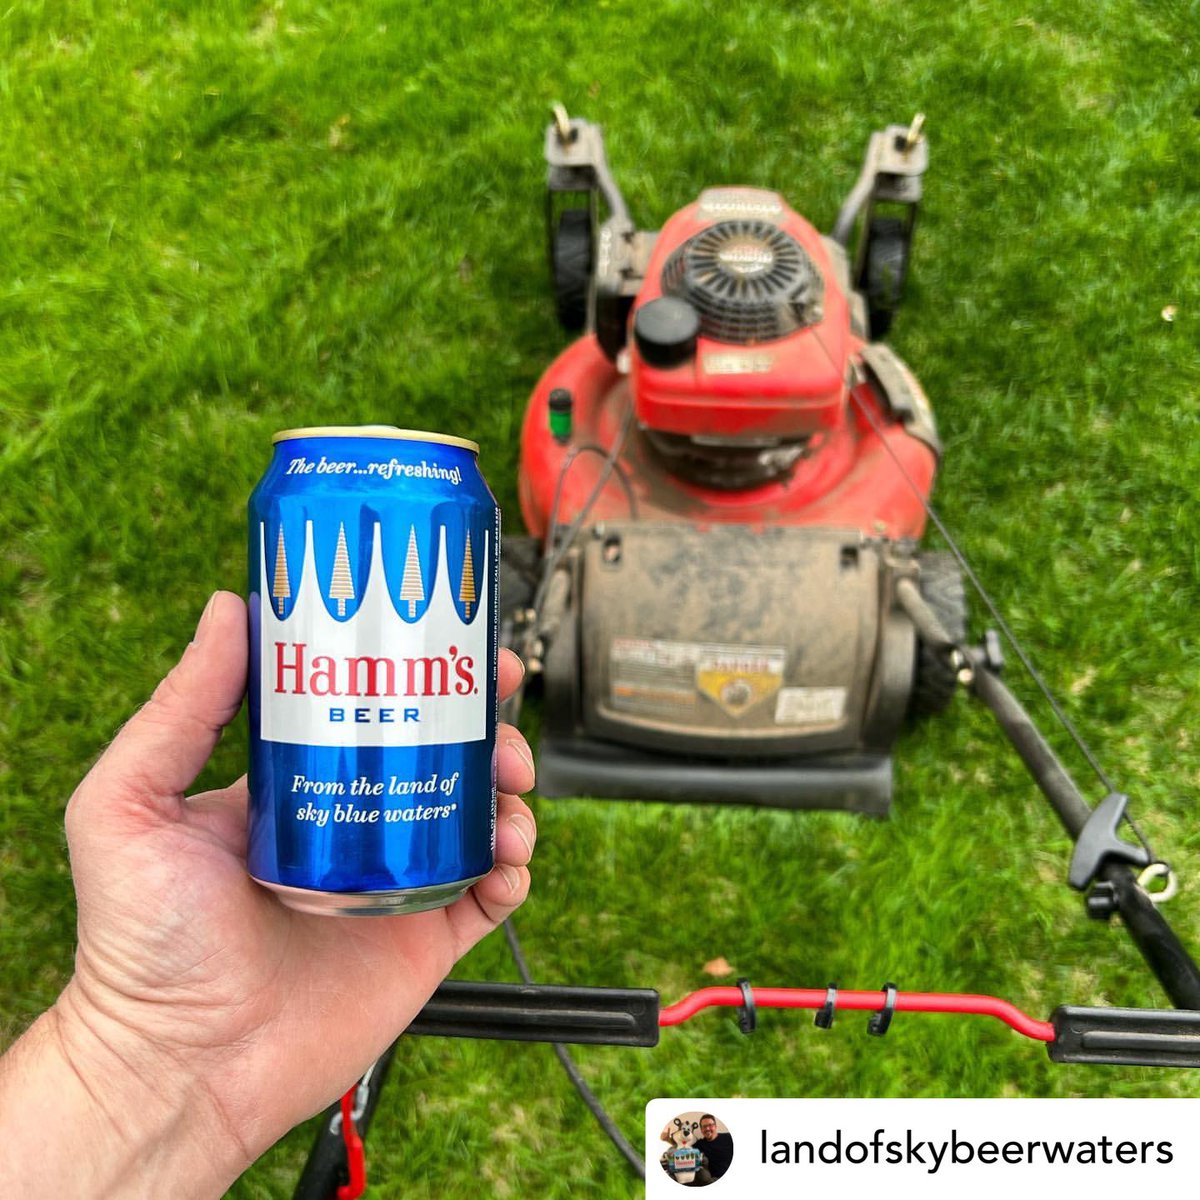 🍺 • @landofskybeerwaters Everyone talks about how great lawnmower beers are, but really I don’t understand how people think it’s easy to mow the lawn with one hand and drink with the other ….. 😀 

#lawnmowerbeer #lawnmower #hamms #hammsbeer #minnesota #lawncare #lawncarelife